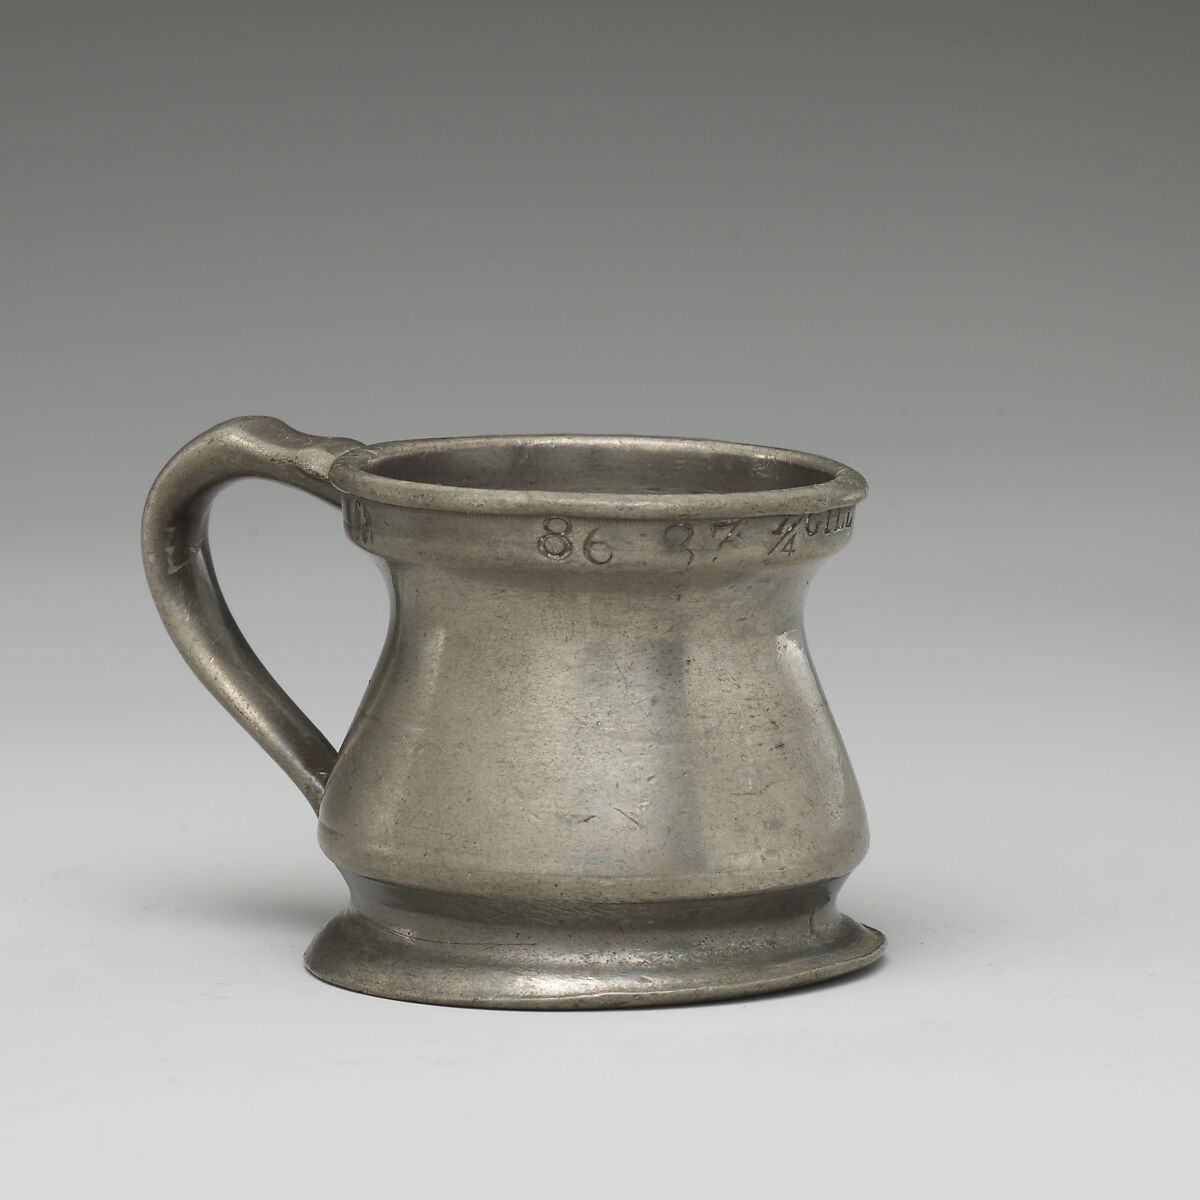 Measure, Pewter, possibly Scottish 